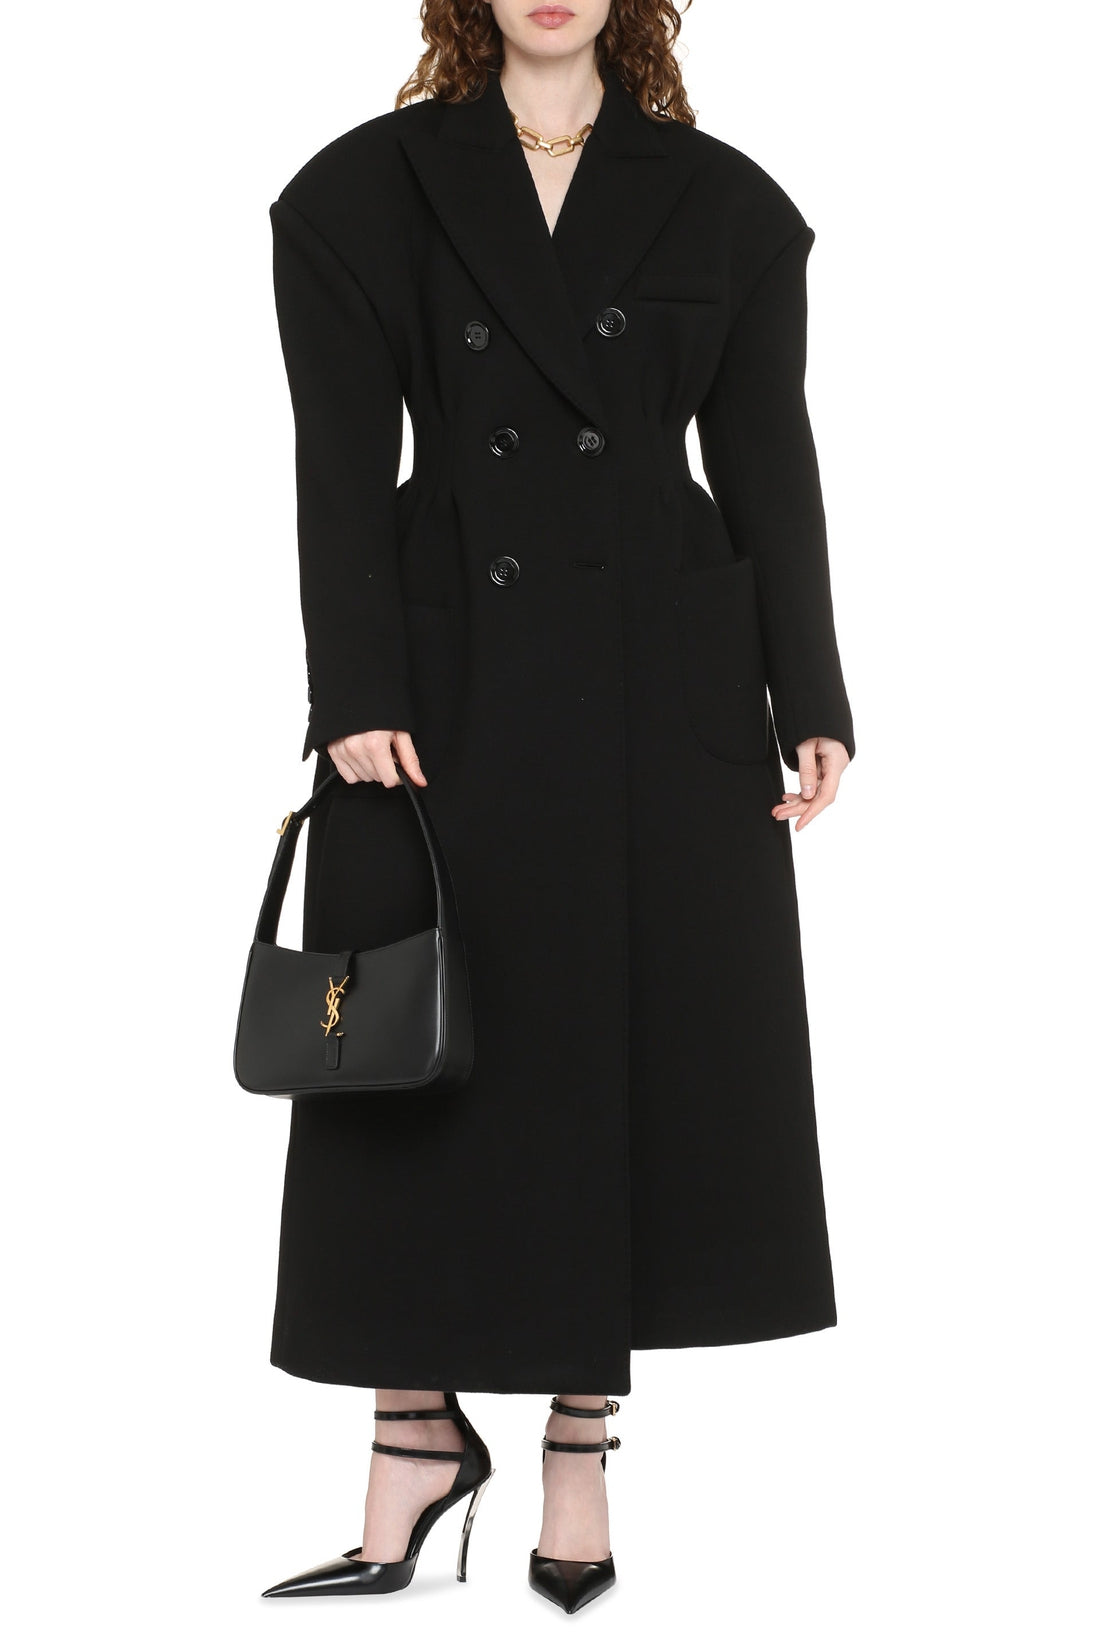 Dolce & Gabbana-OUTLET-SALE-Double-breasted coat-ARCHIVIST